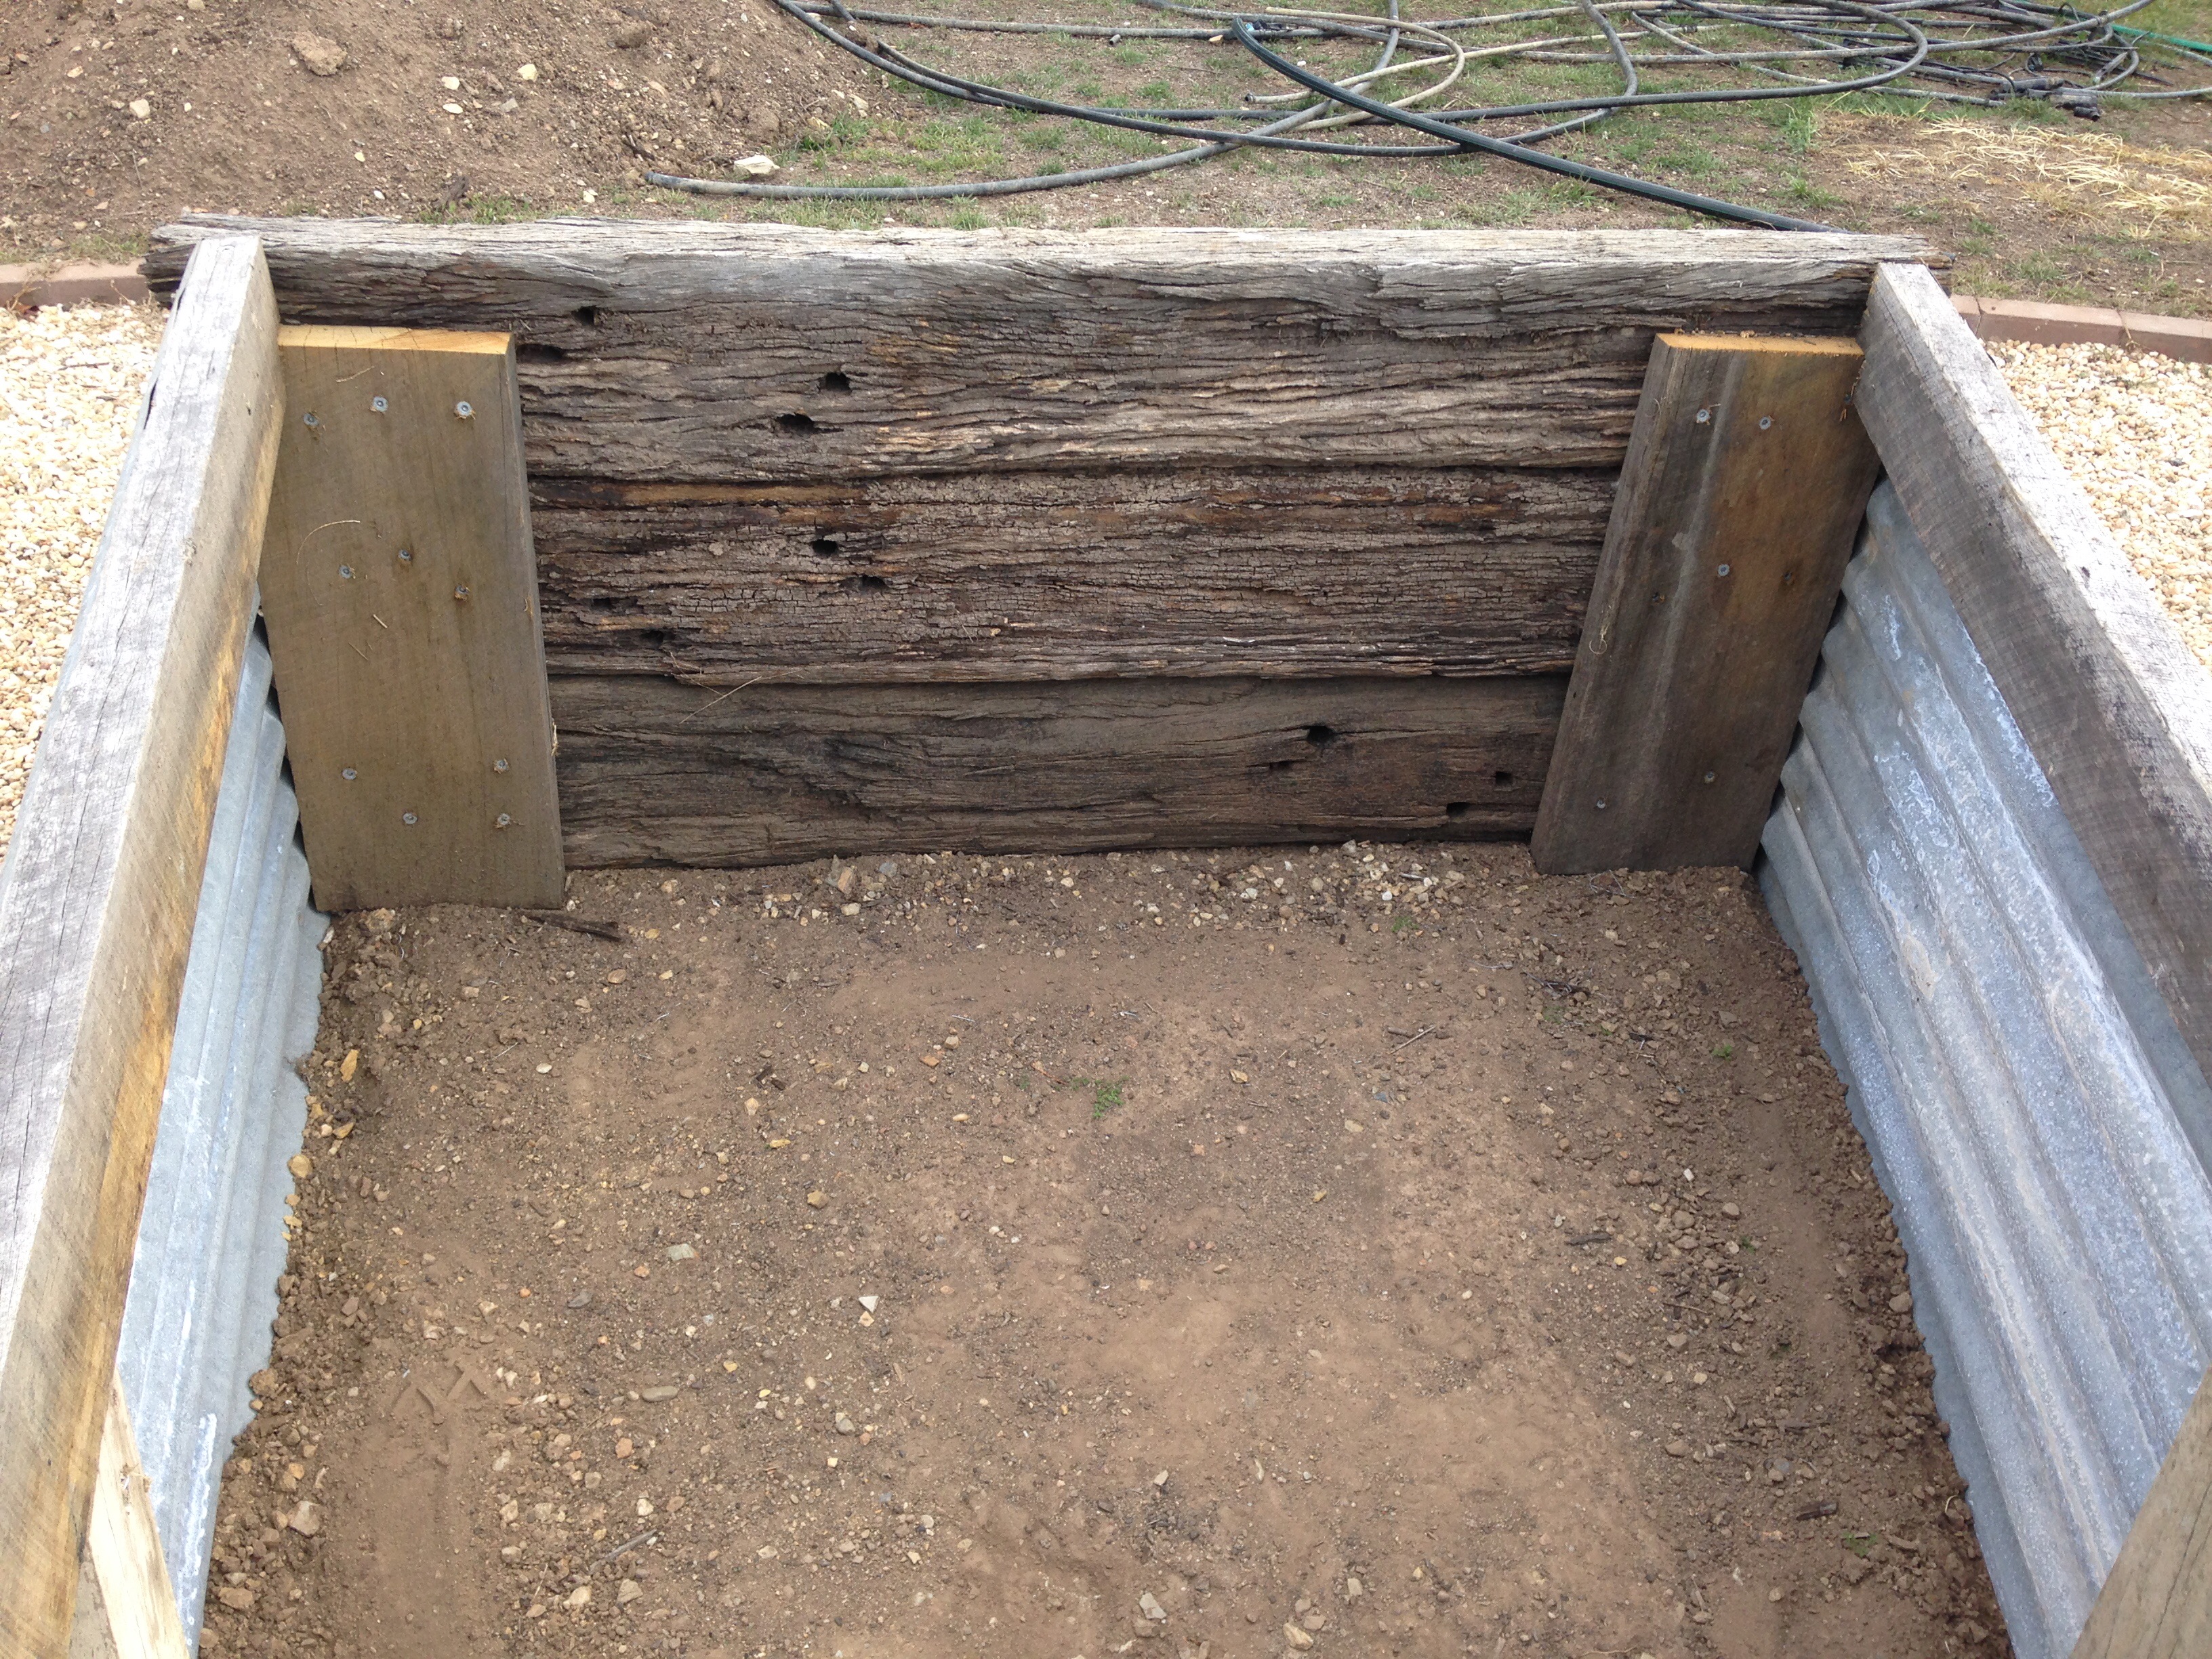 How to build a wicking garden bed.